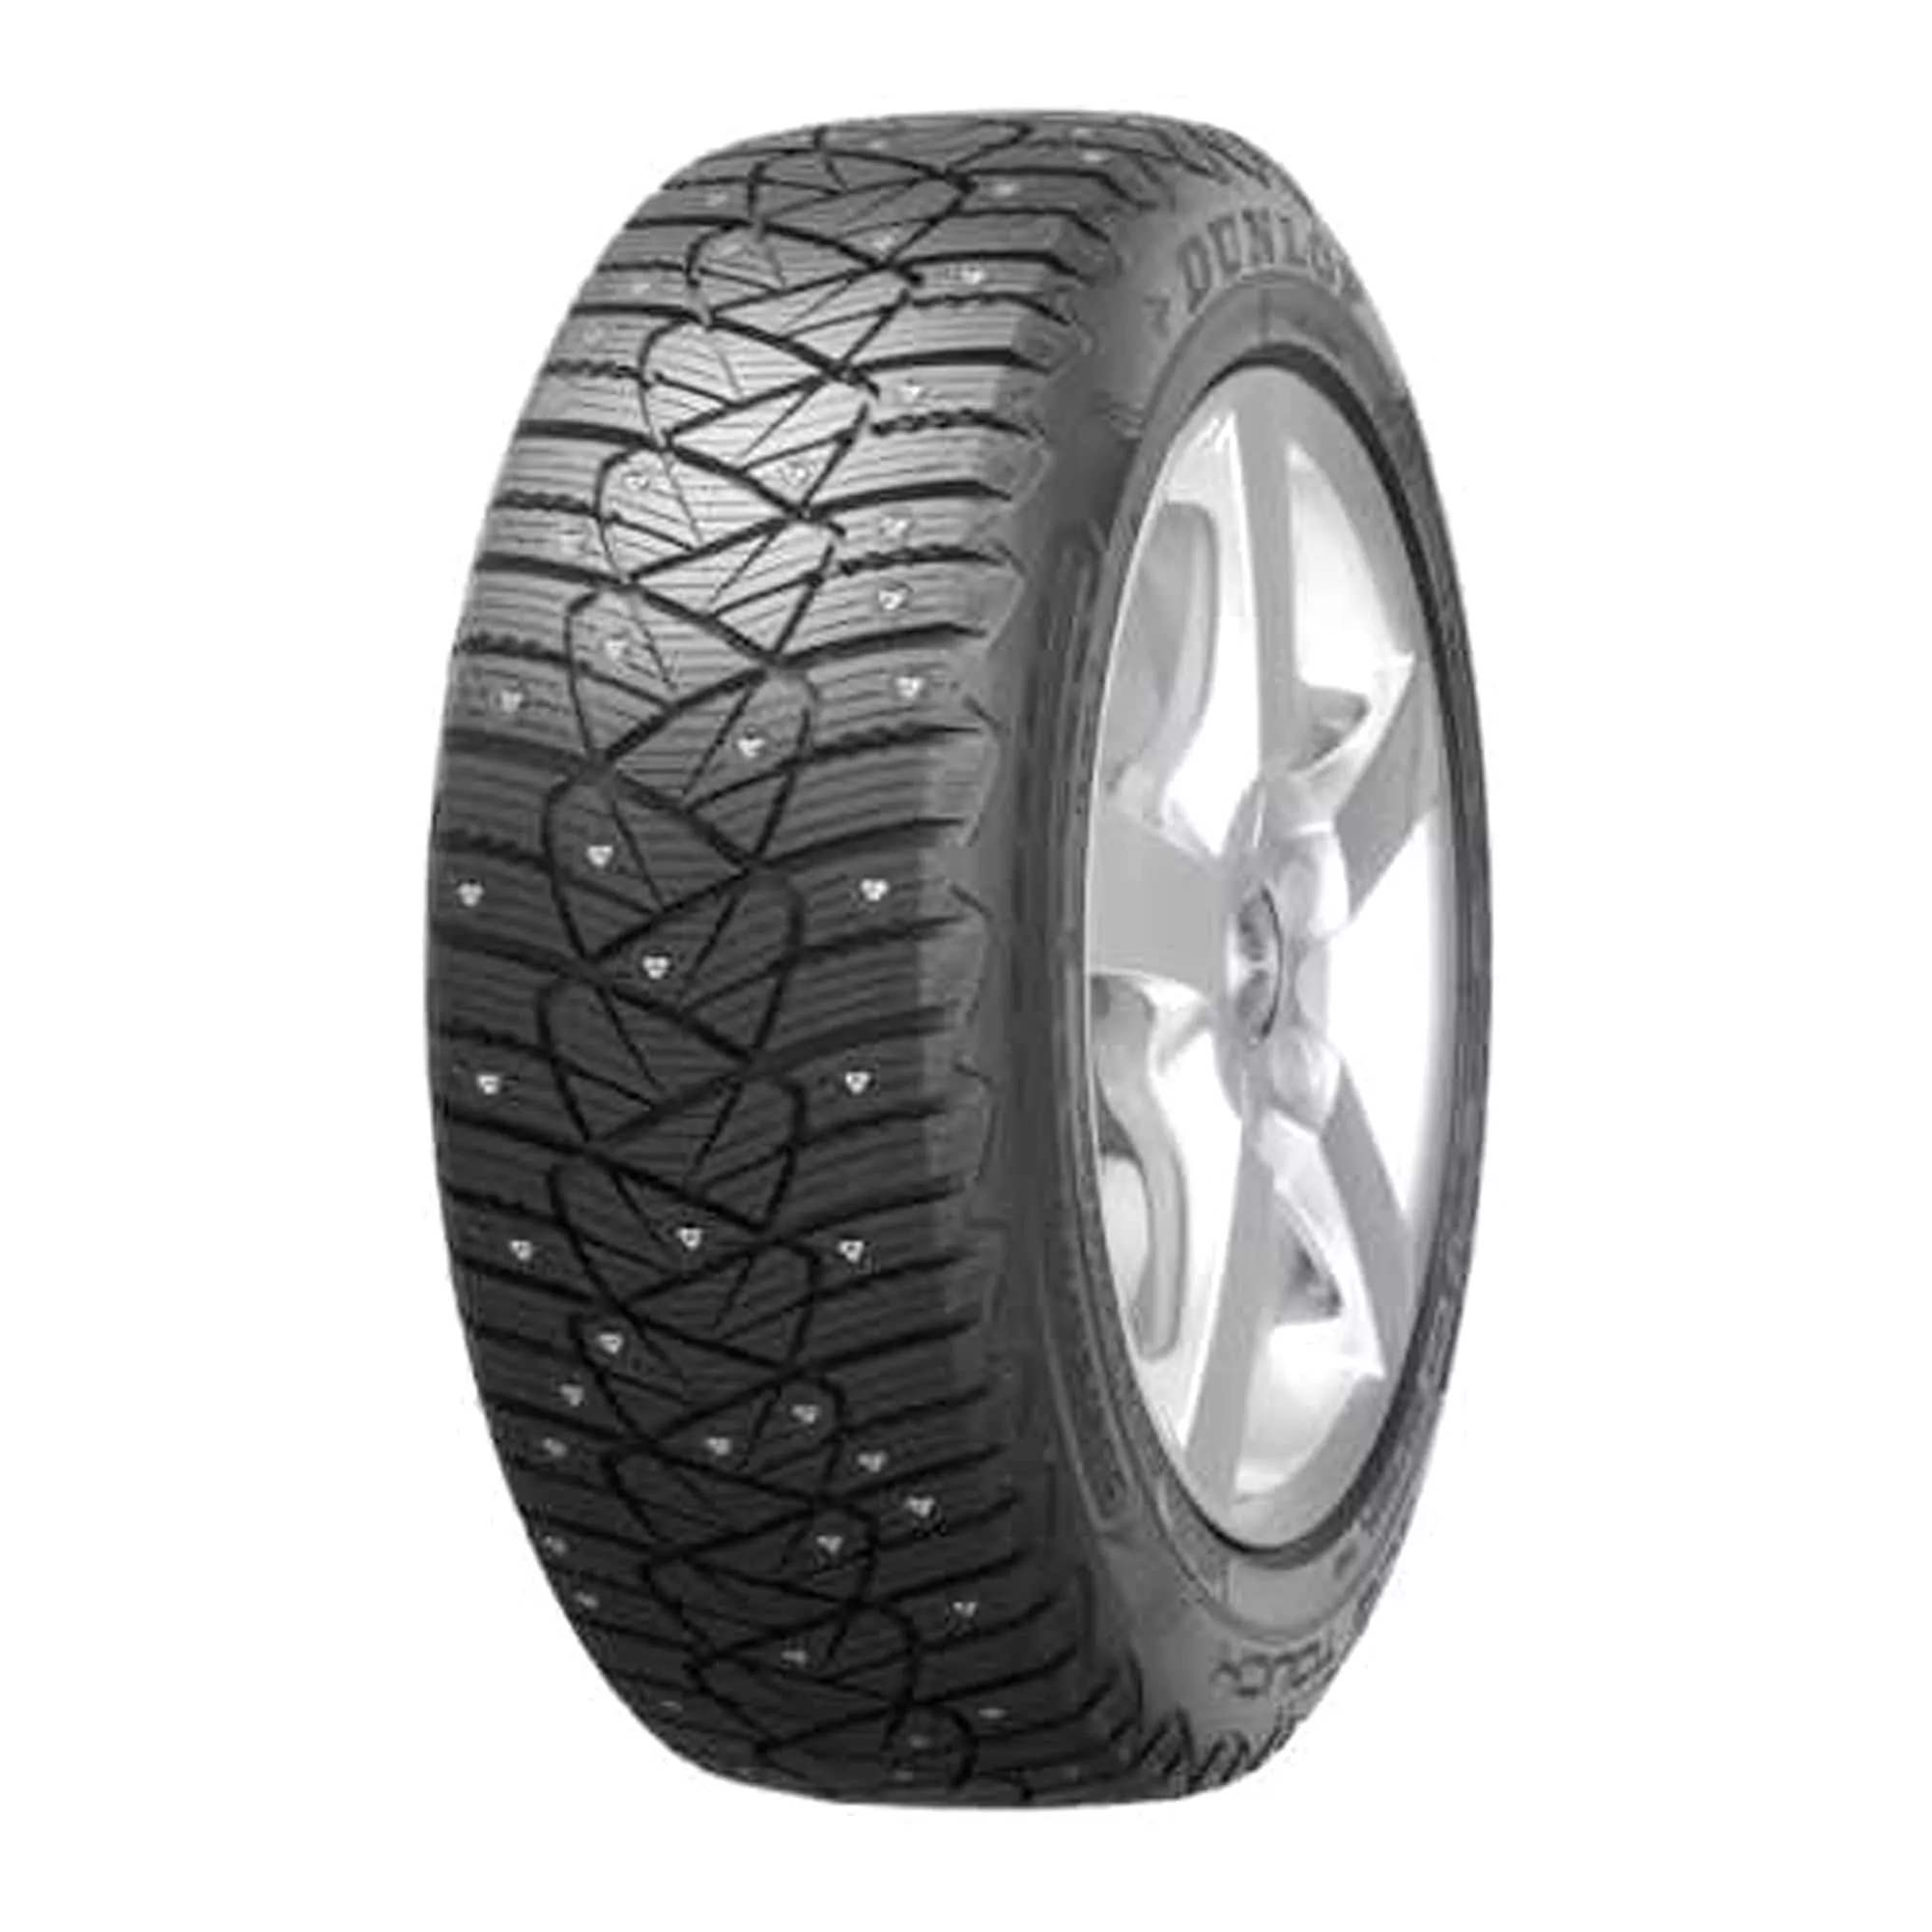 Шина 215/65R16 98T SP Ice Touch D-Stud XL шип.